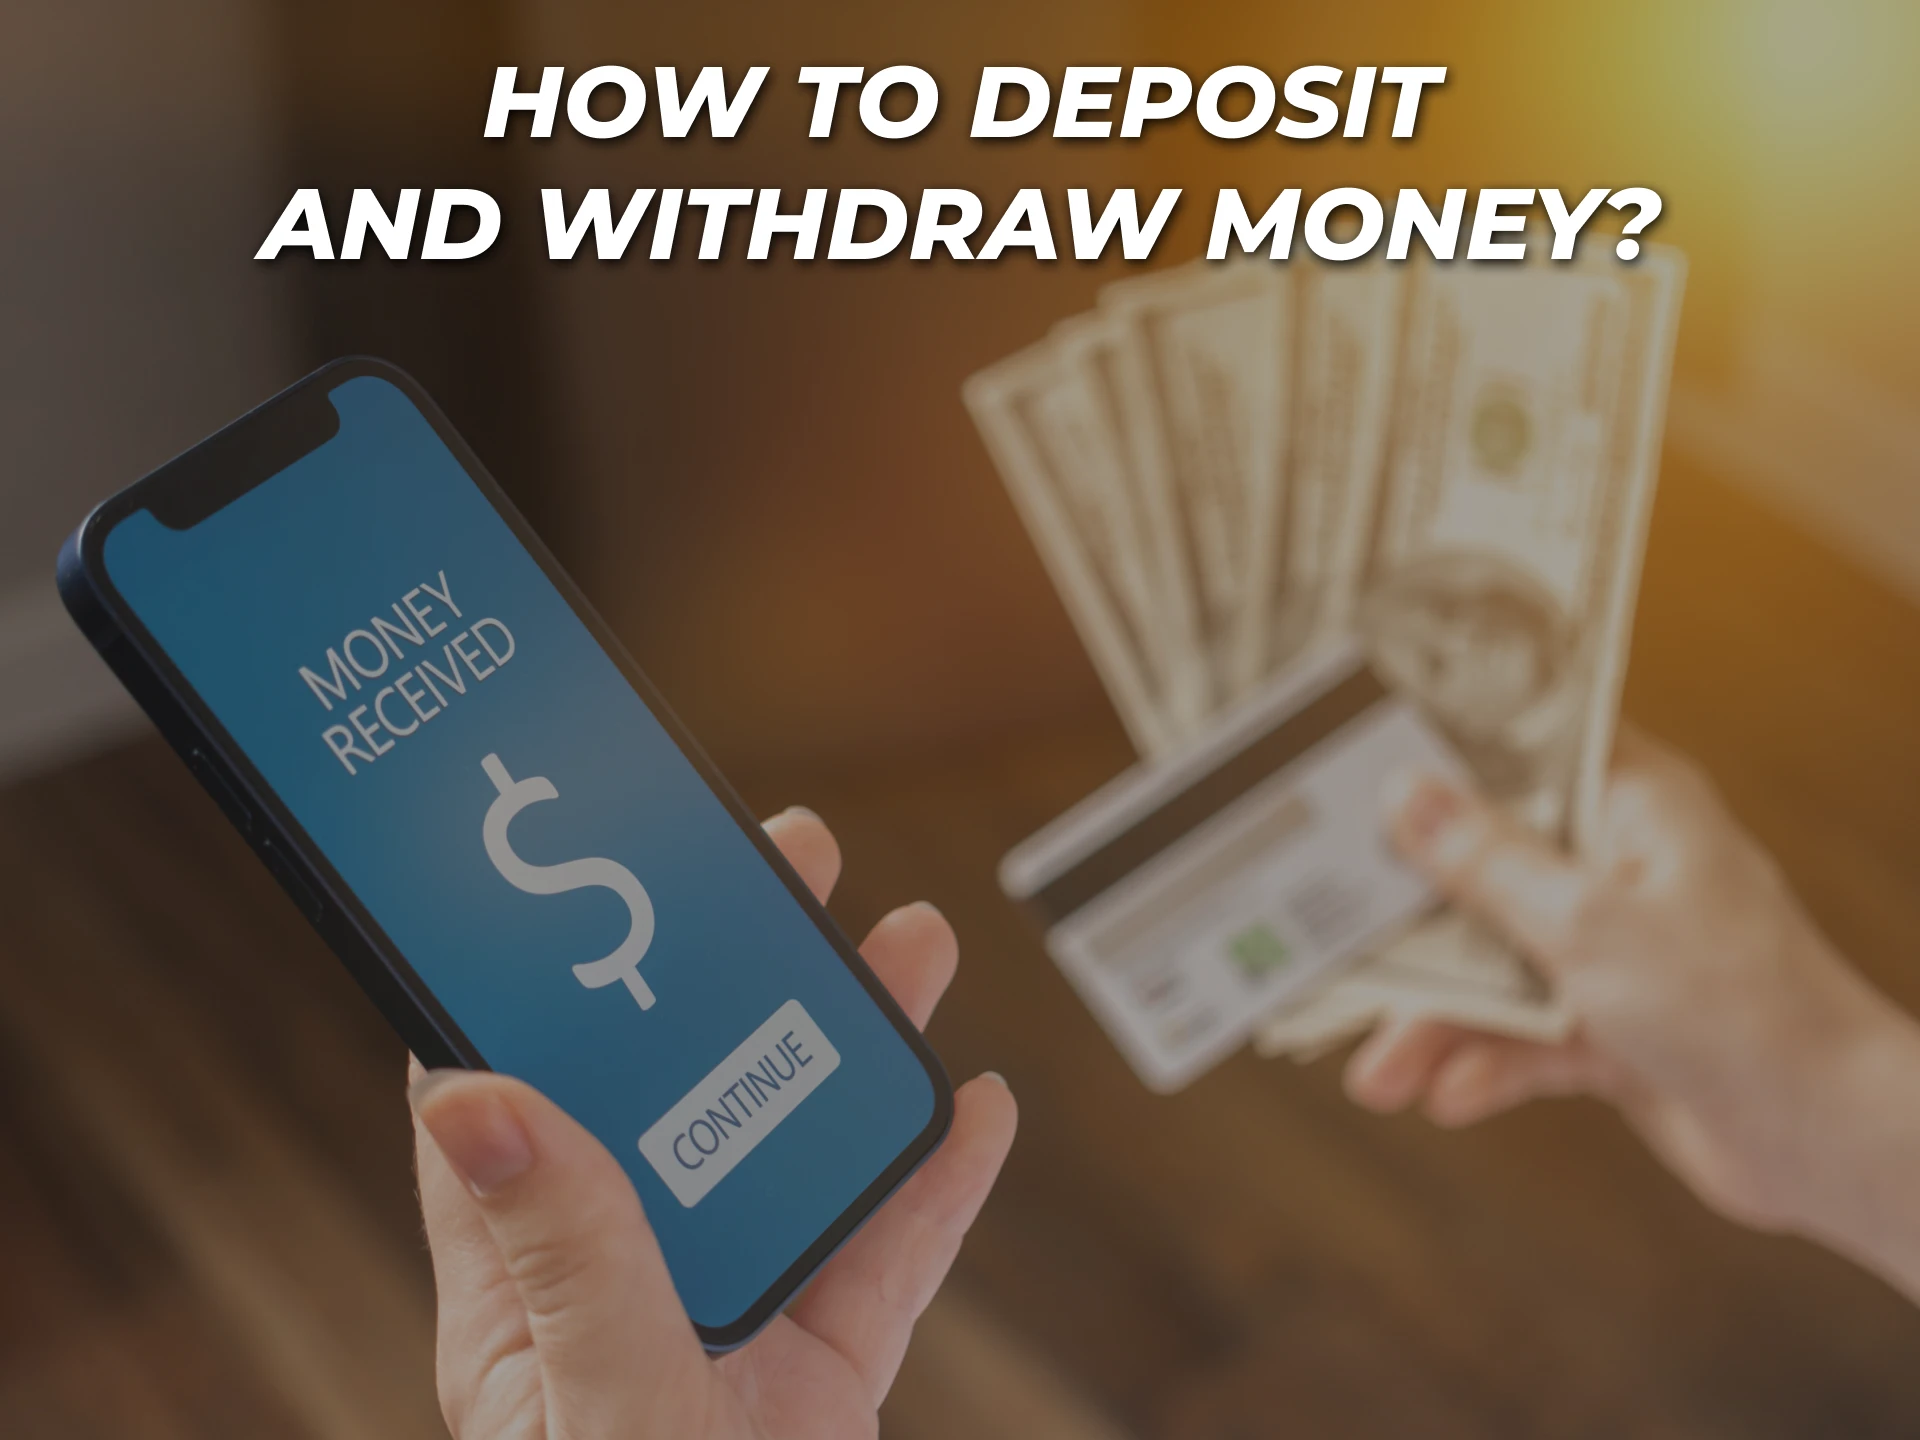 Use one of these popular payment methods to deposit or withdraw money.